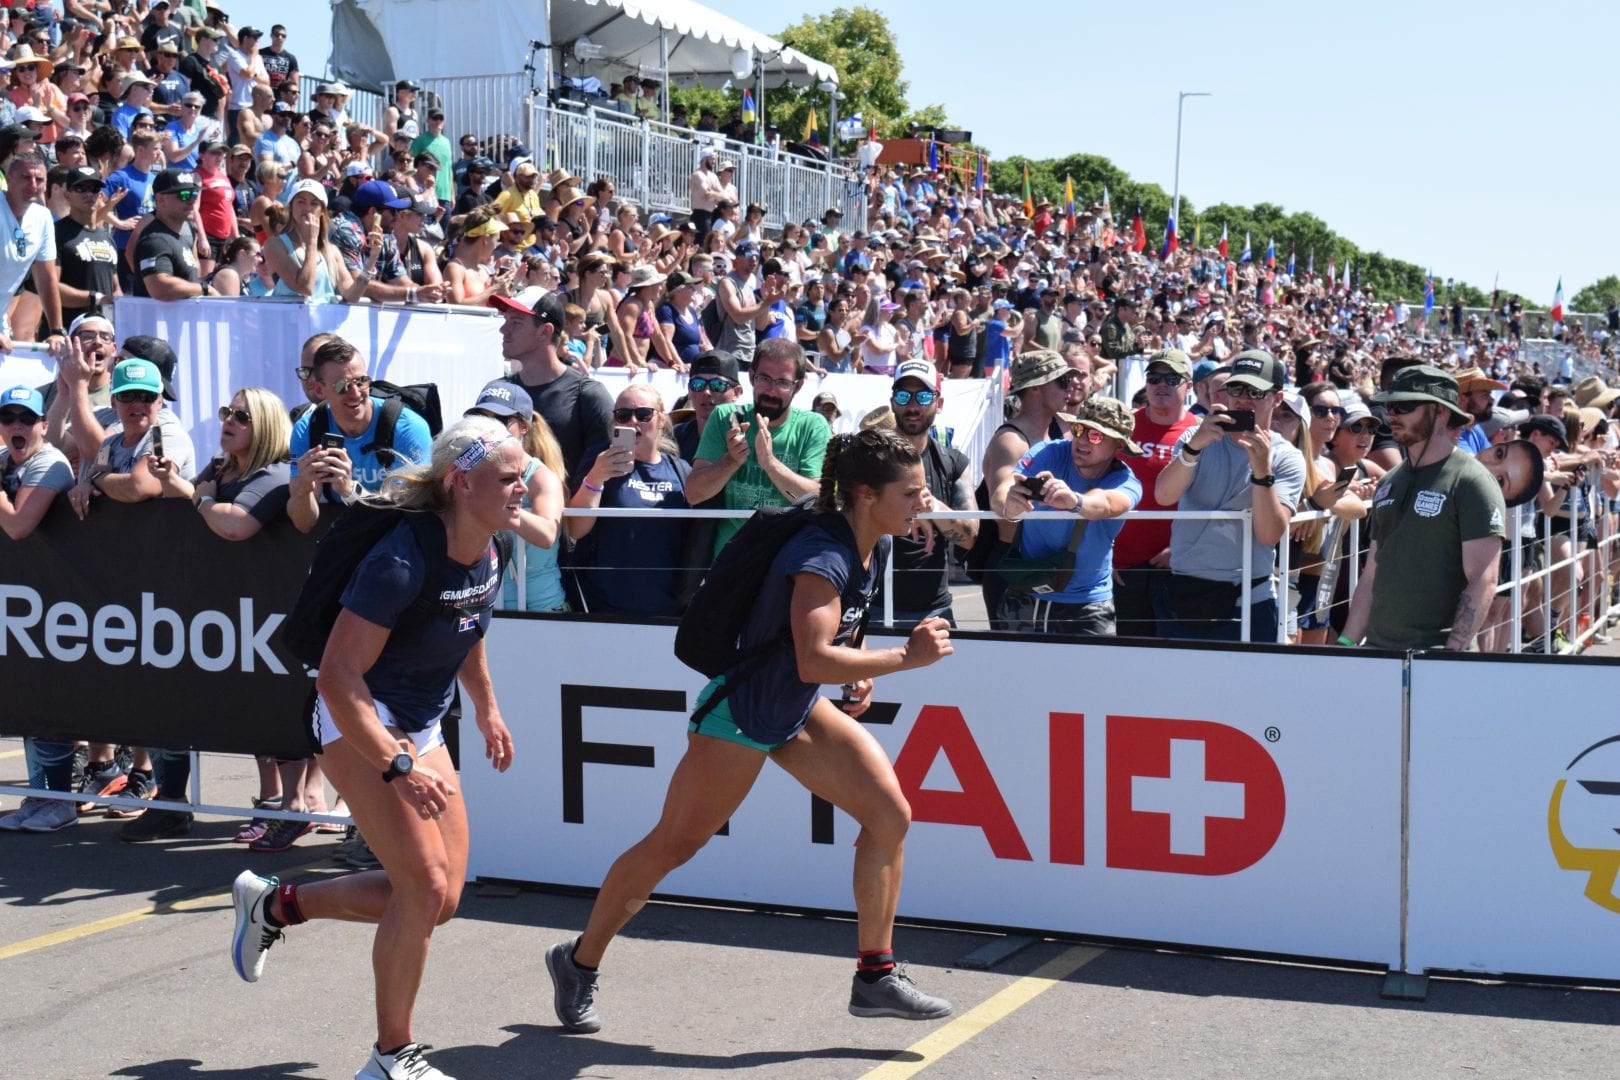 Carrie Beamer completes the Ruck Run event at the 2019 CrossFit Games.